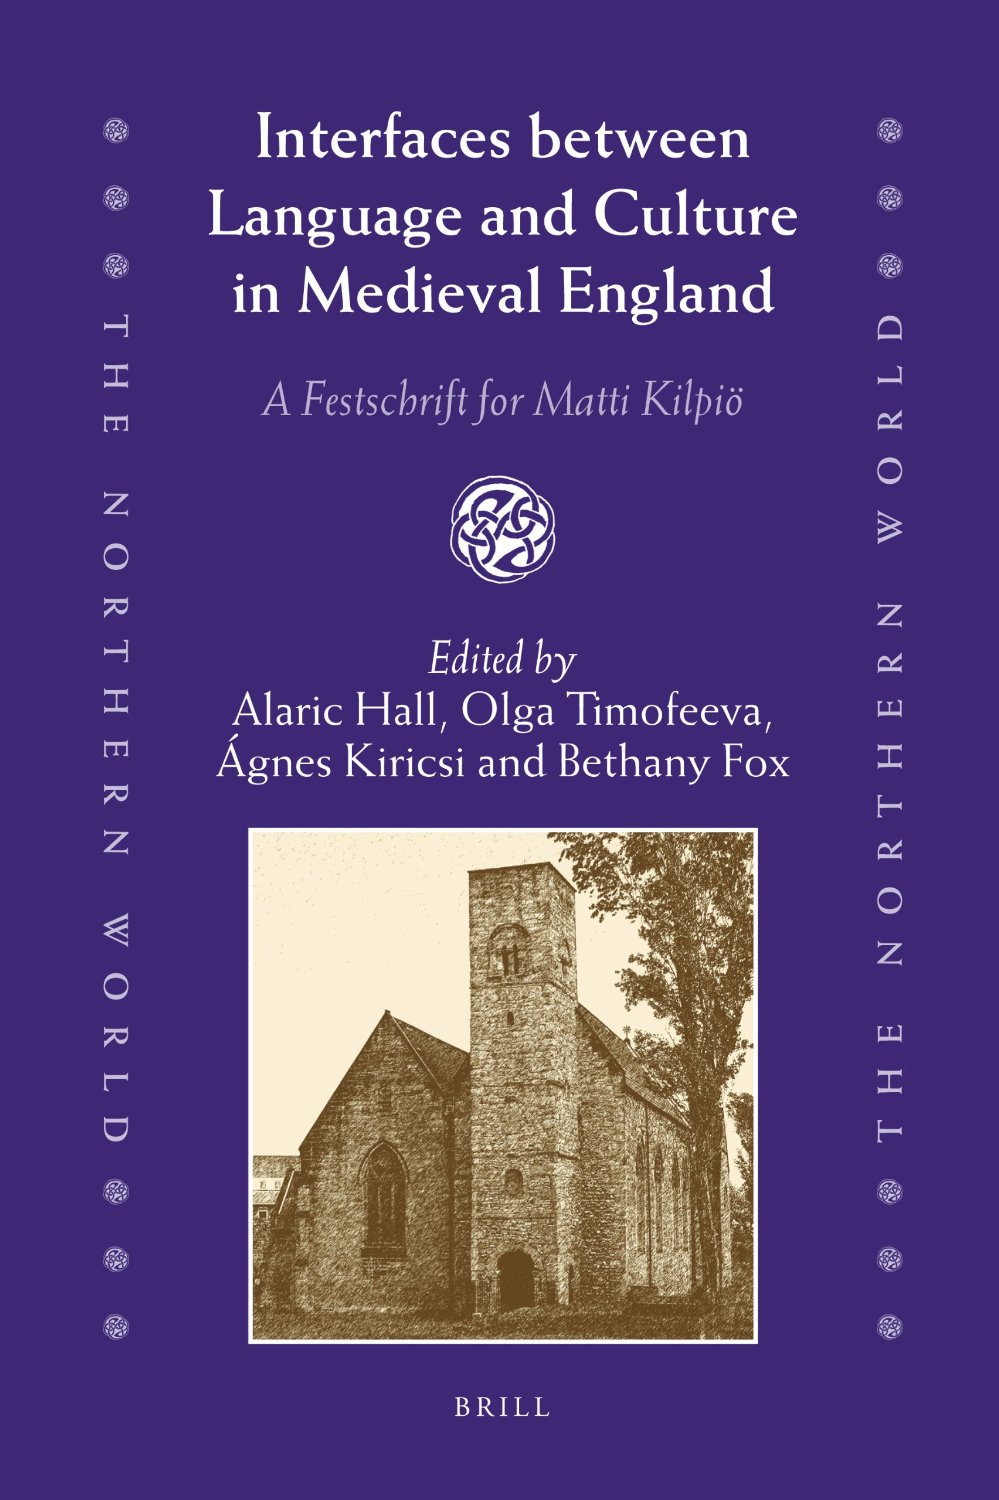 Interfaces between Language and Culture in Medieval England